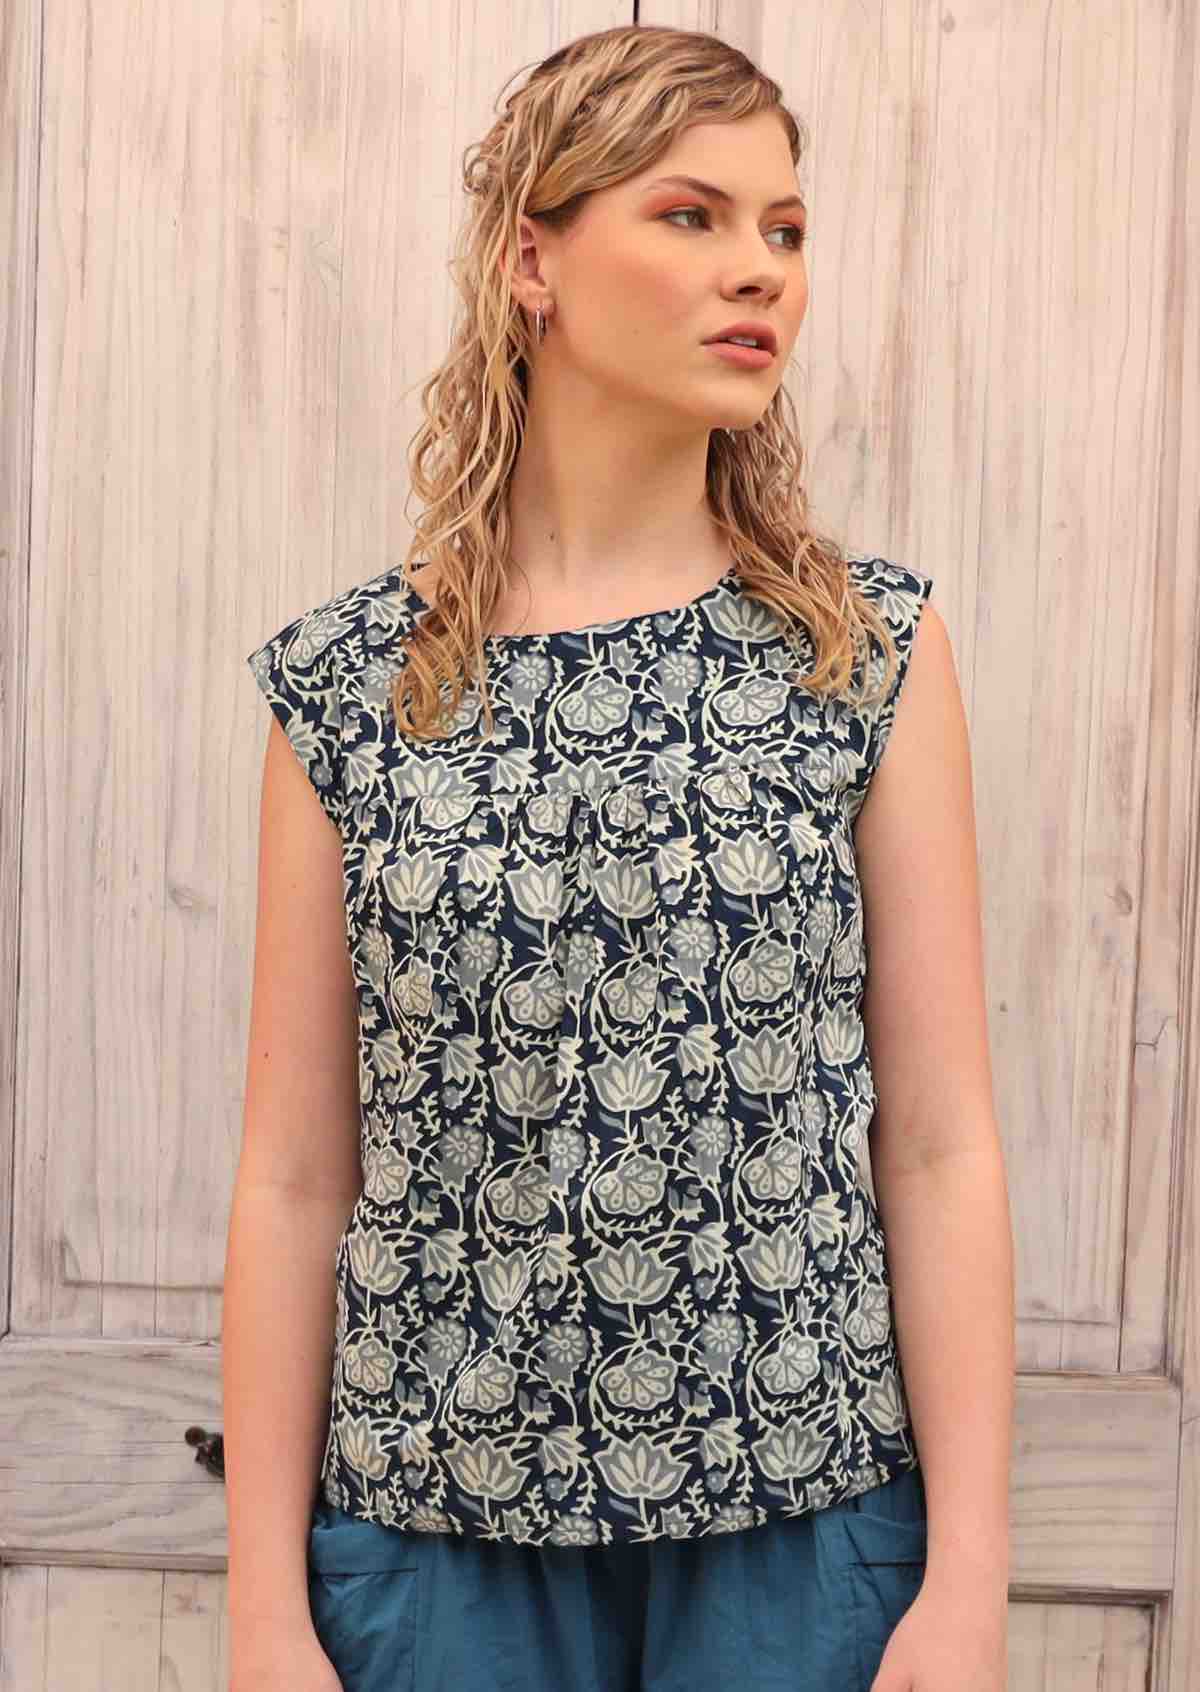 Blonde model wears a loose fit top with small gathers under the neckline.